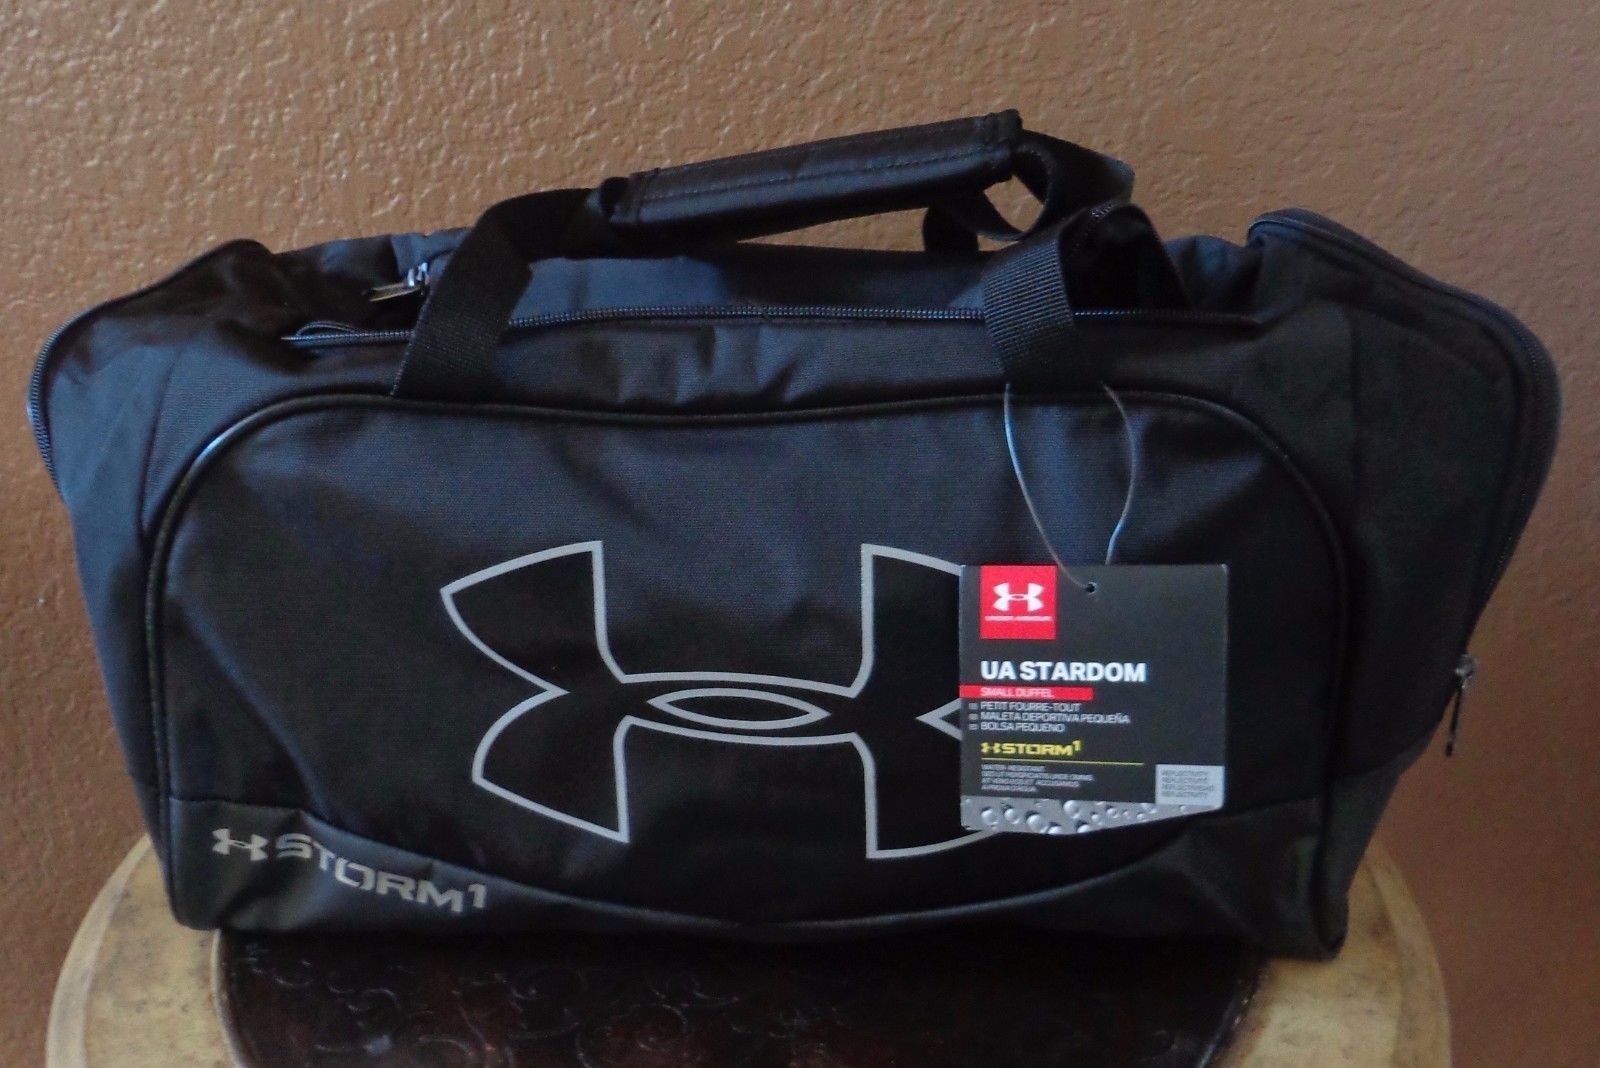 under armour storm duffle bag small